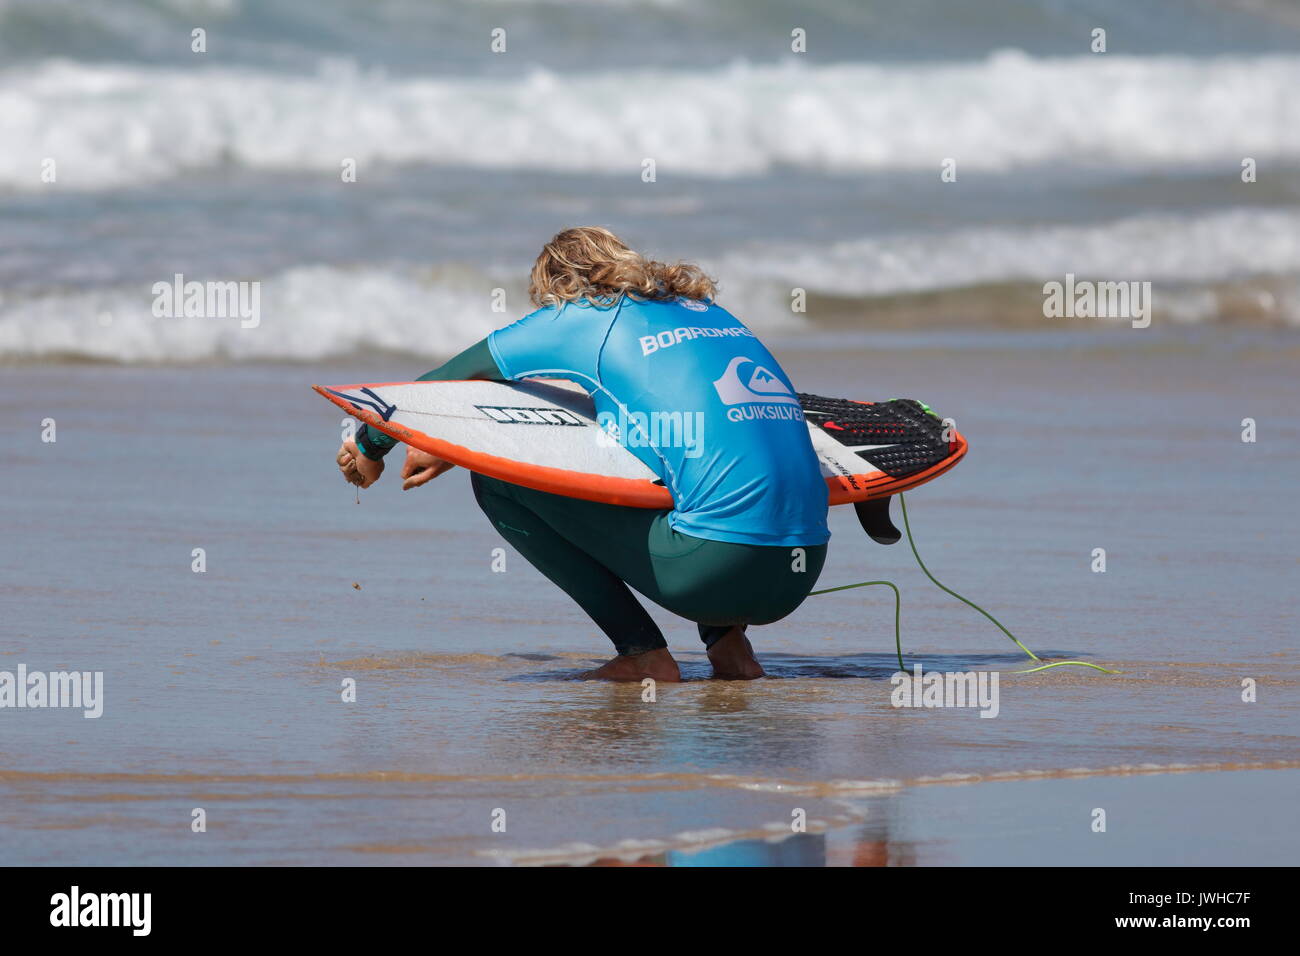 Fistral Beach, Newquay, Cornwall, UK. 12th Aug, 2017. Surfers take part in Day 4 of the Boardmasters Championship. Competitors from around the world take part in the UK's biggest surf contest. Australian Lliam Mortensen shows his skills. Credit: Nicholas Burningham/Alamy Live News Stock Photo